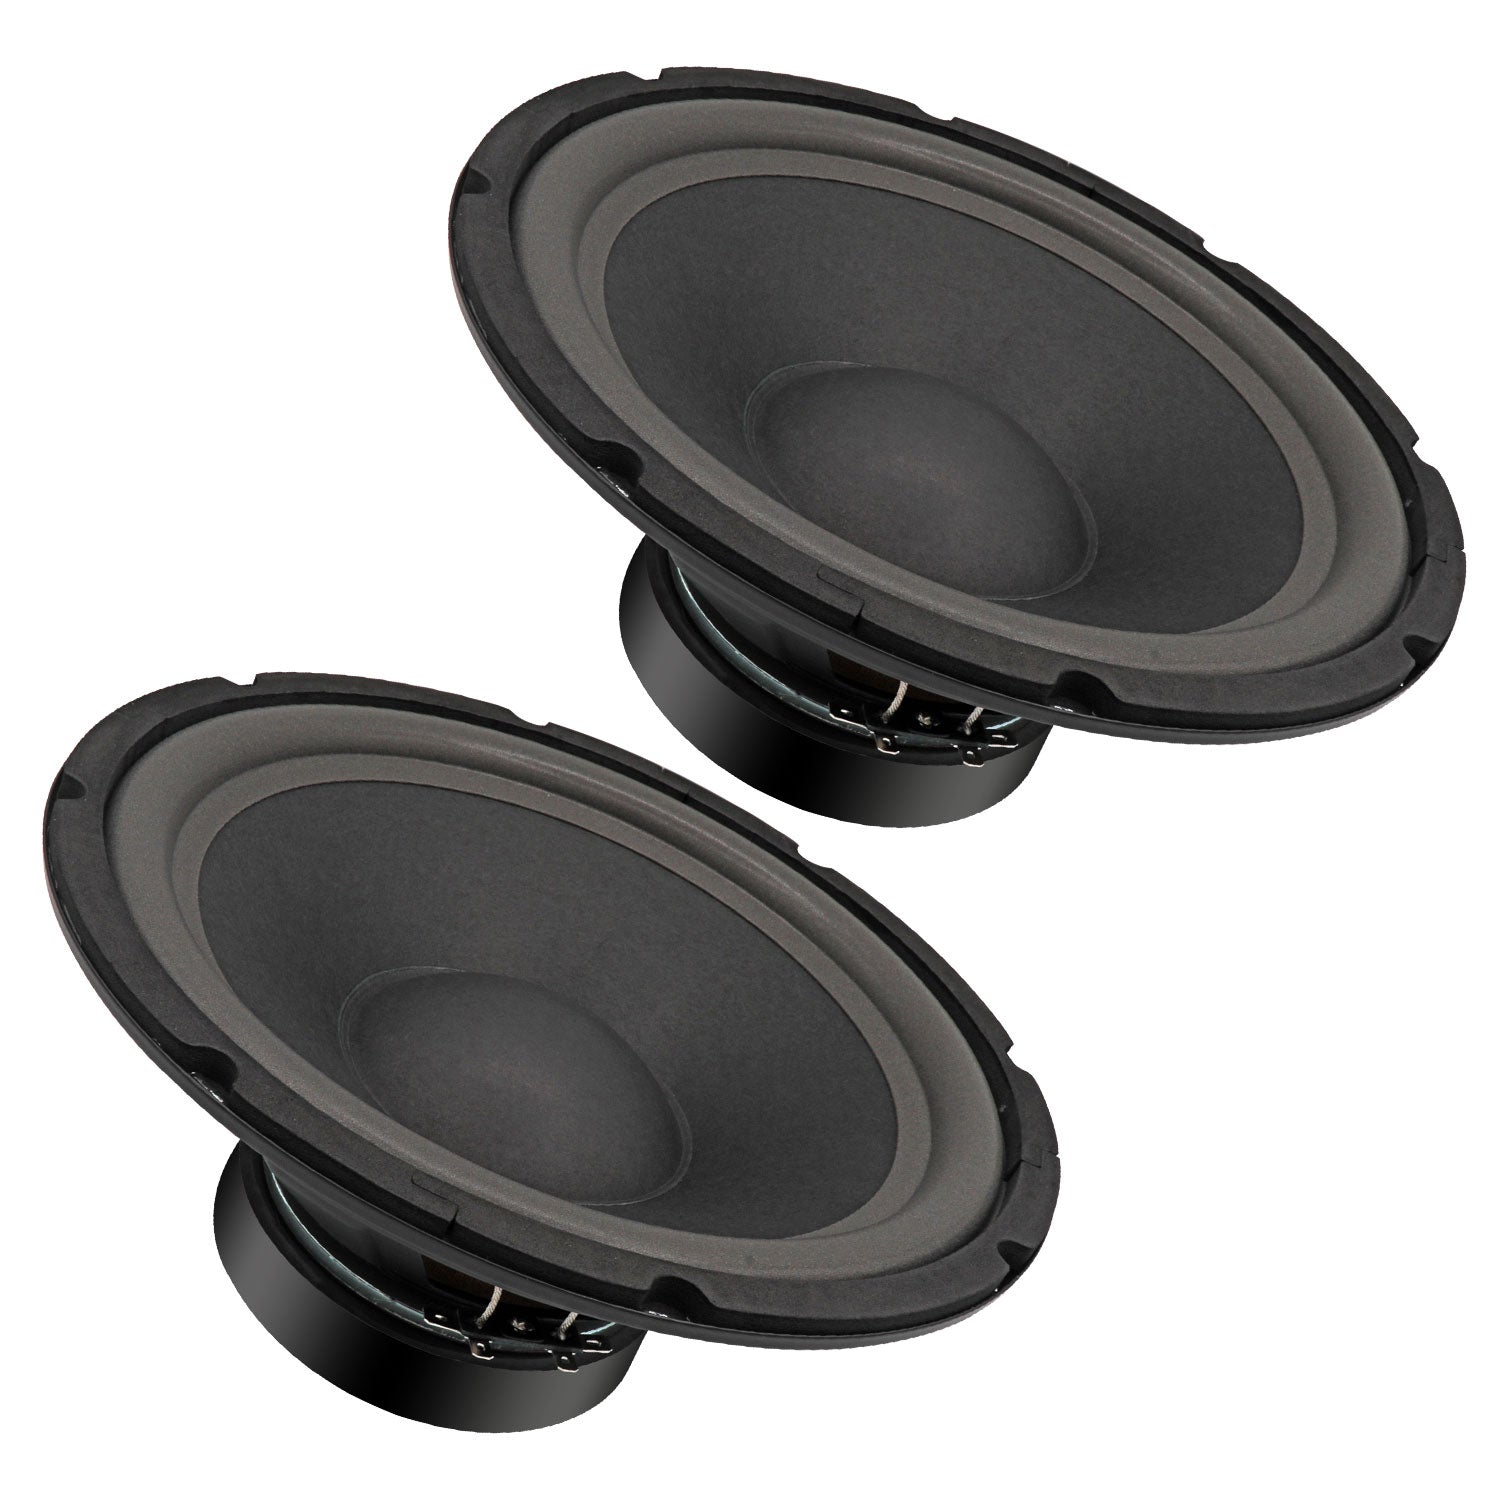 5 Core 10 Inch Subwoofer Speaker 750W Peak 4 Ohm Replacement Car Bass Sub Woofer 23 Oz Magnet 1/2 Pc